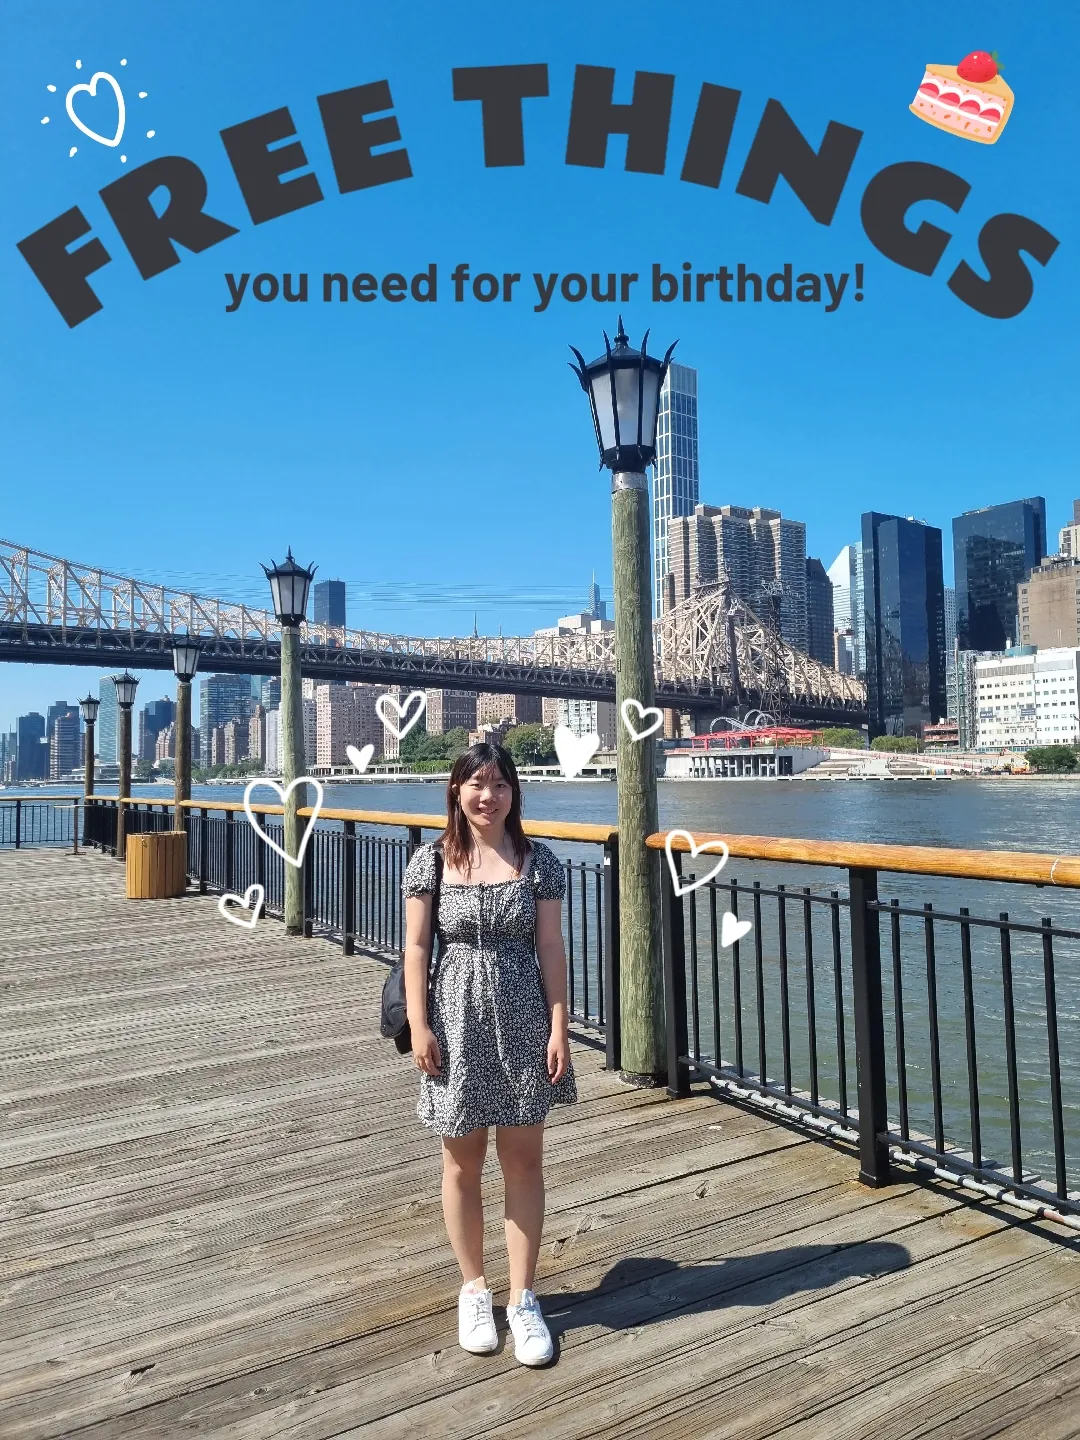 BEST FREE DEALS for your birthday month! ✅'s images(0)